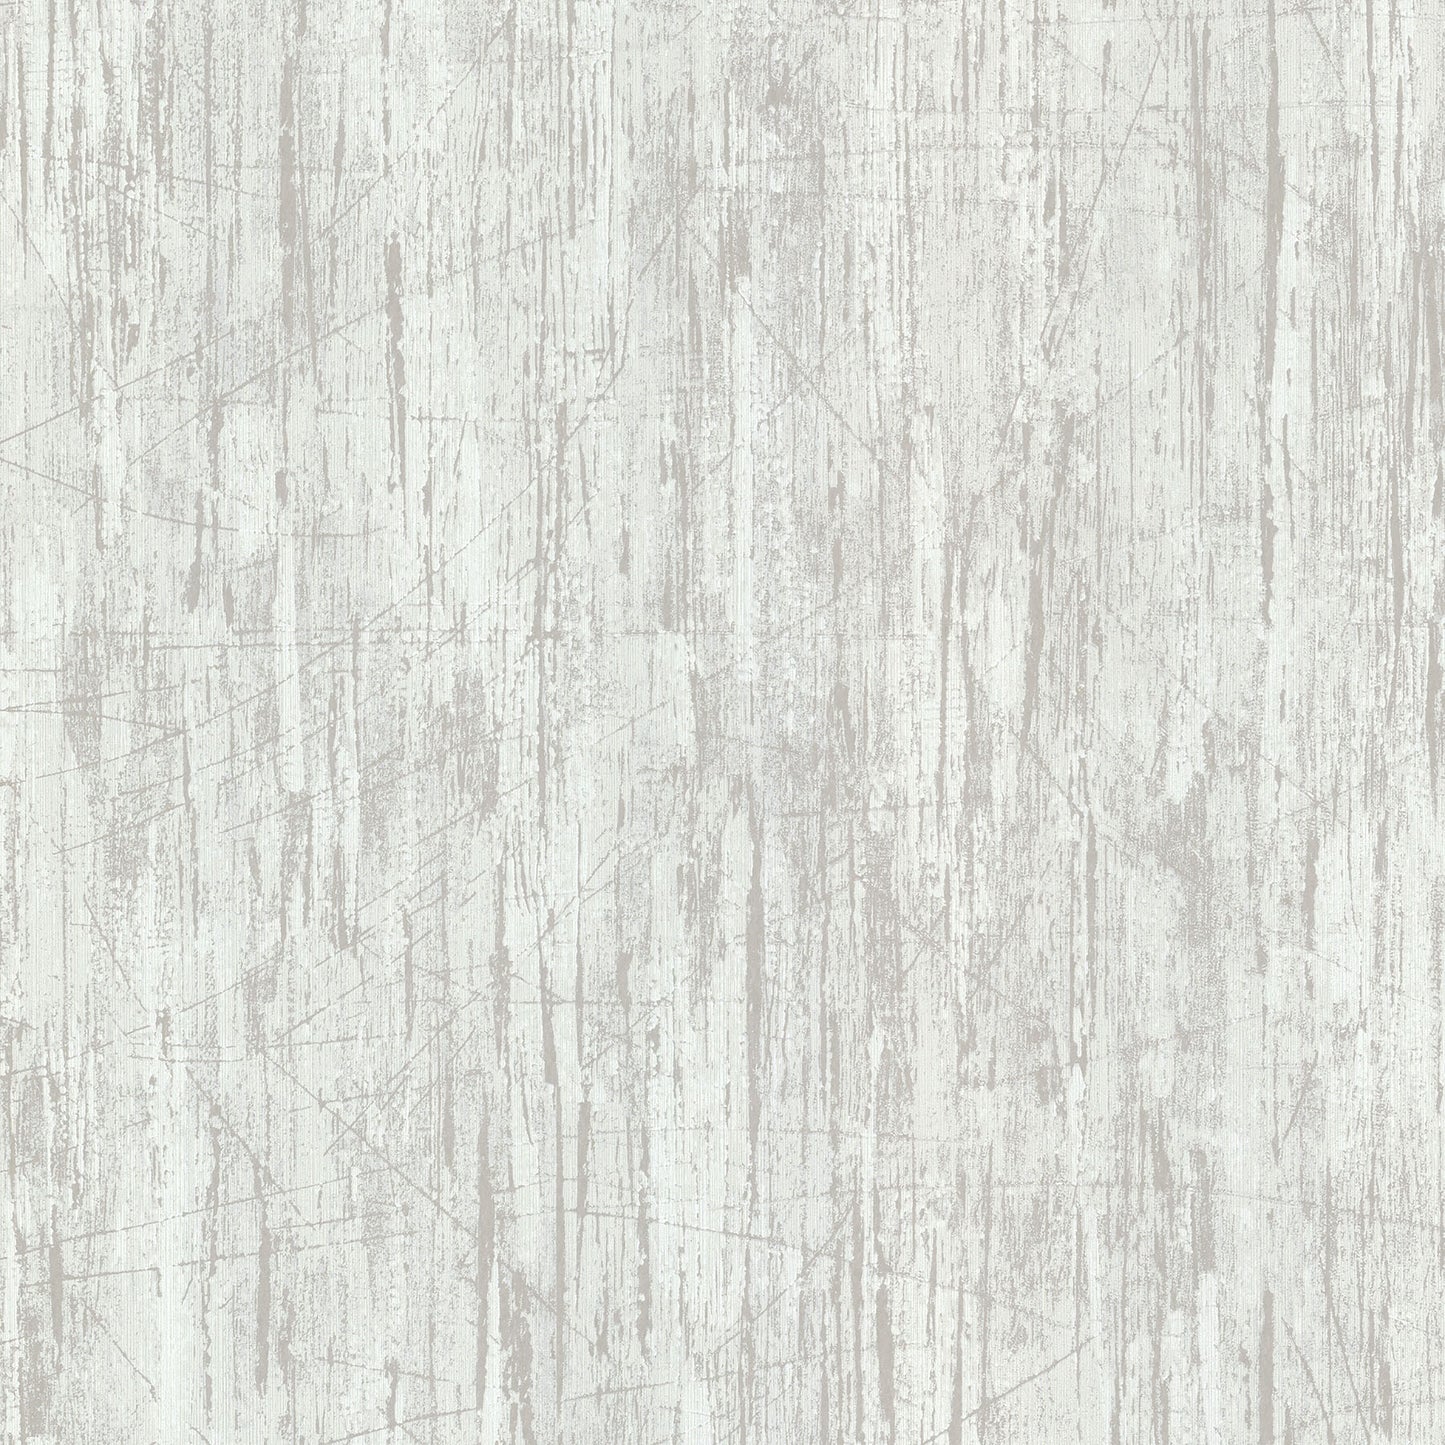 Purchase 2774-480955 Stones & Woods Neutrals Textured Wallpaper by Advantage